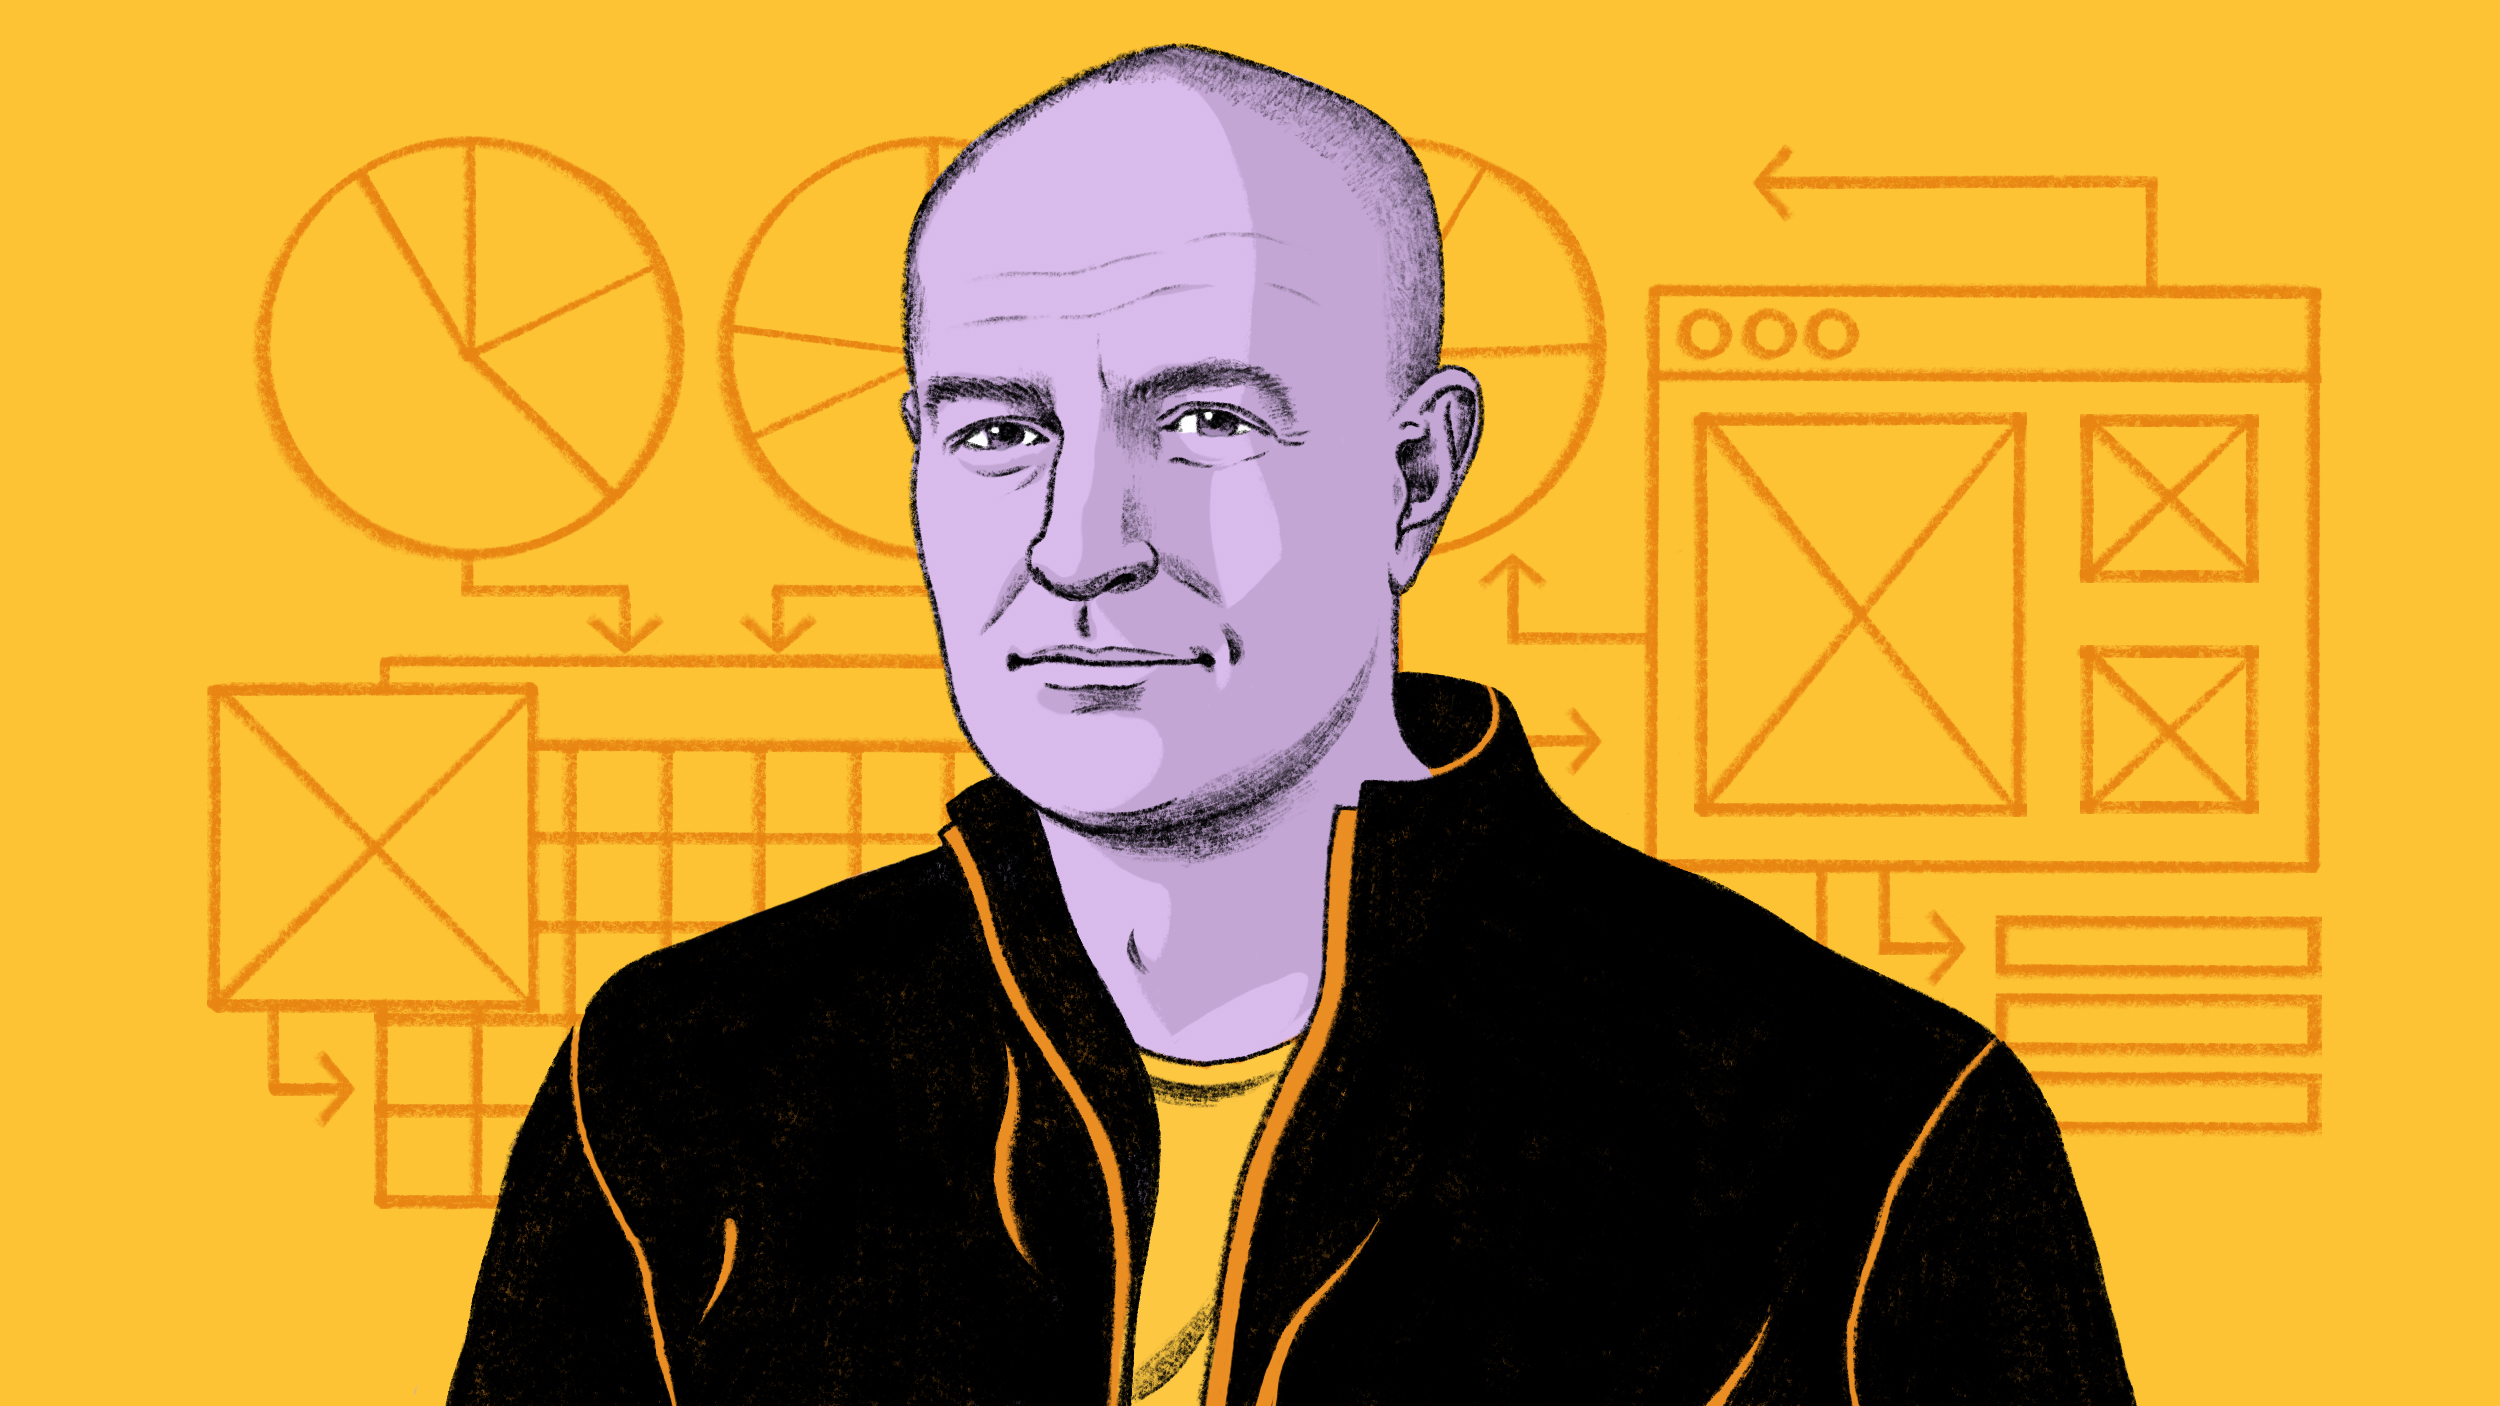 Illustration of a bald man in a black jacket standing against a yellow background, surrounded by diagrams, charts, and web design elements that evoke holistic innovation.